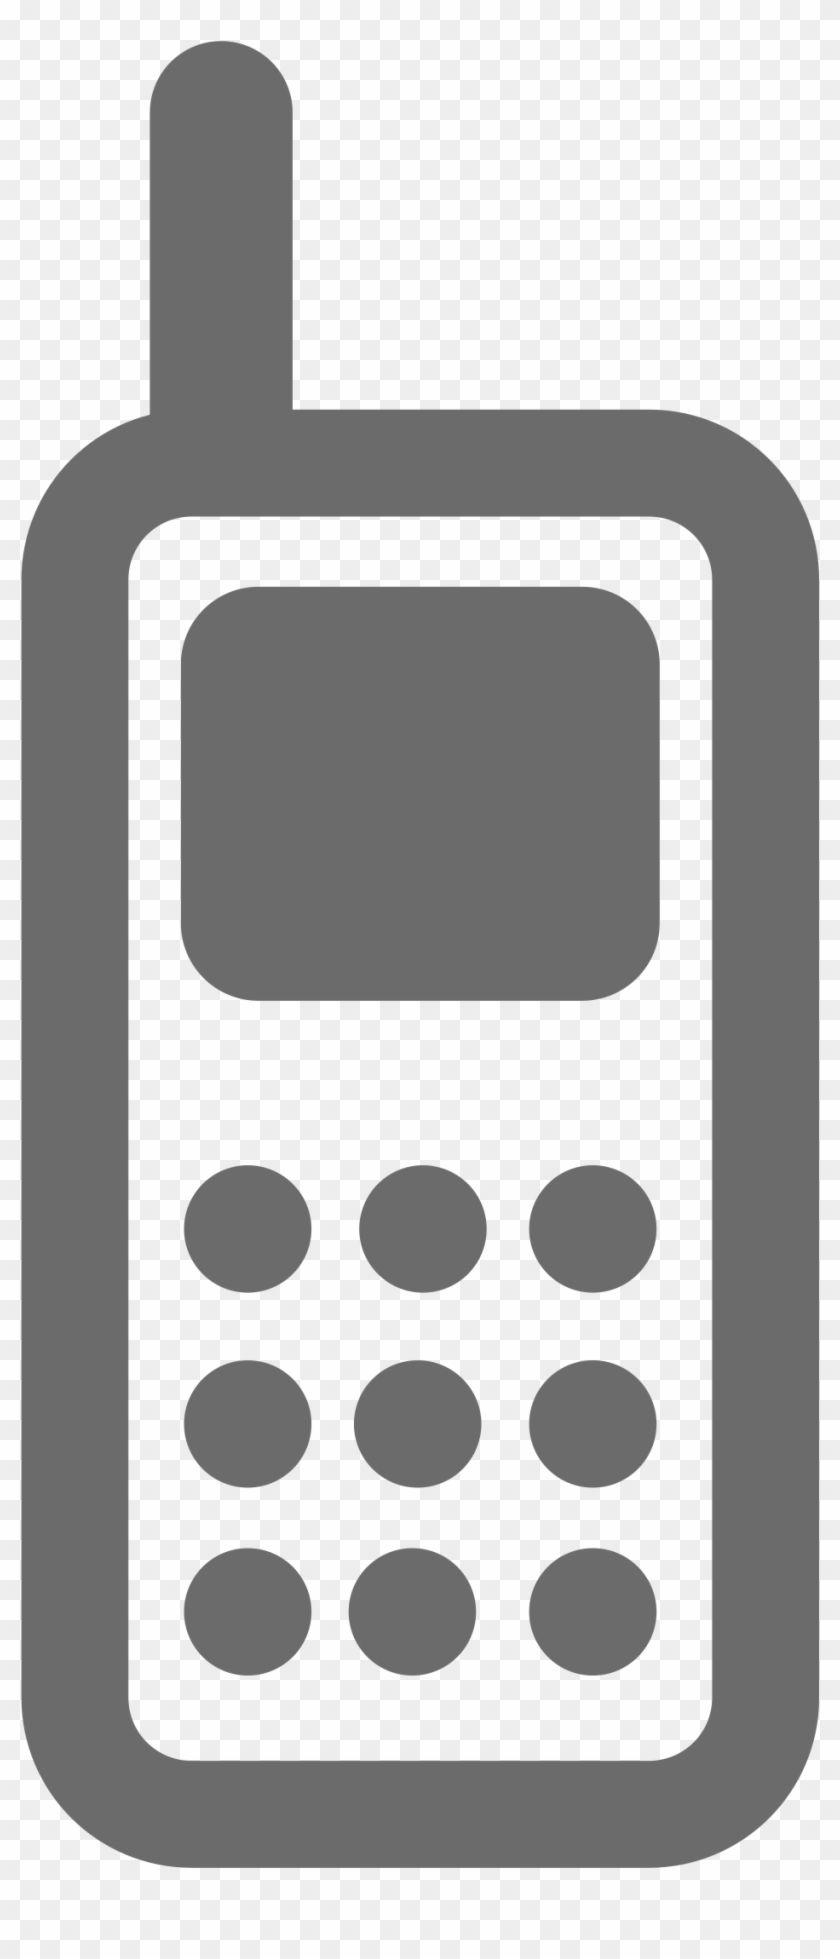 Cell Phone Gray Logo - Hd Cell Phone Logo Vector Image - Cell Phone Logo Png - Free ...